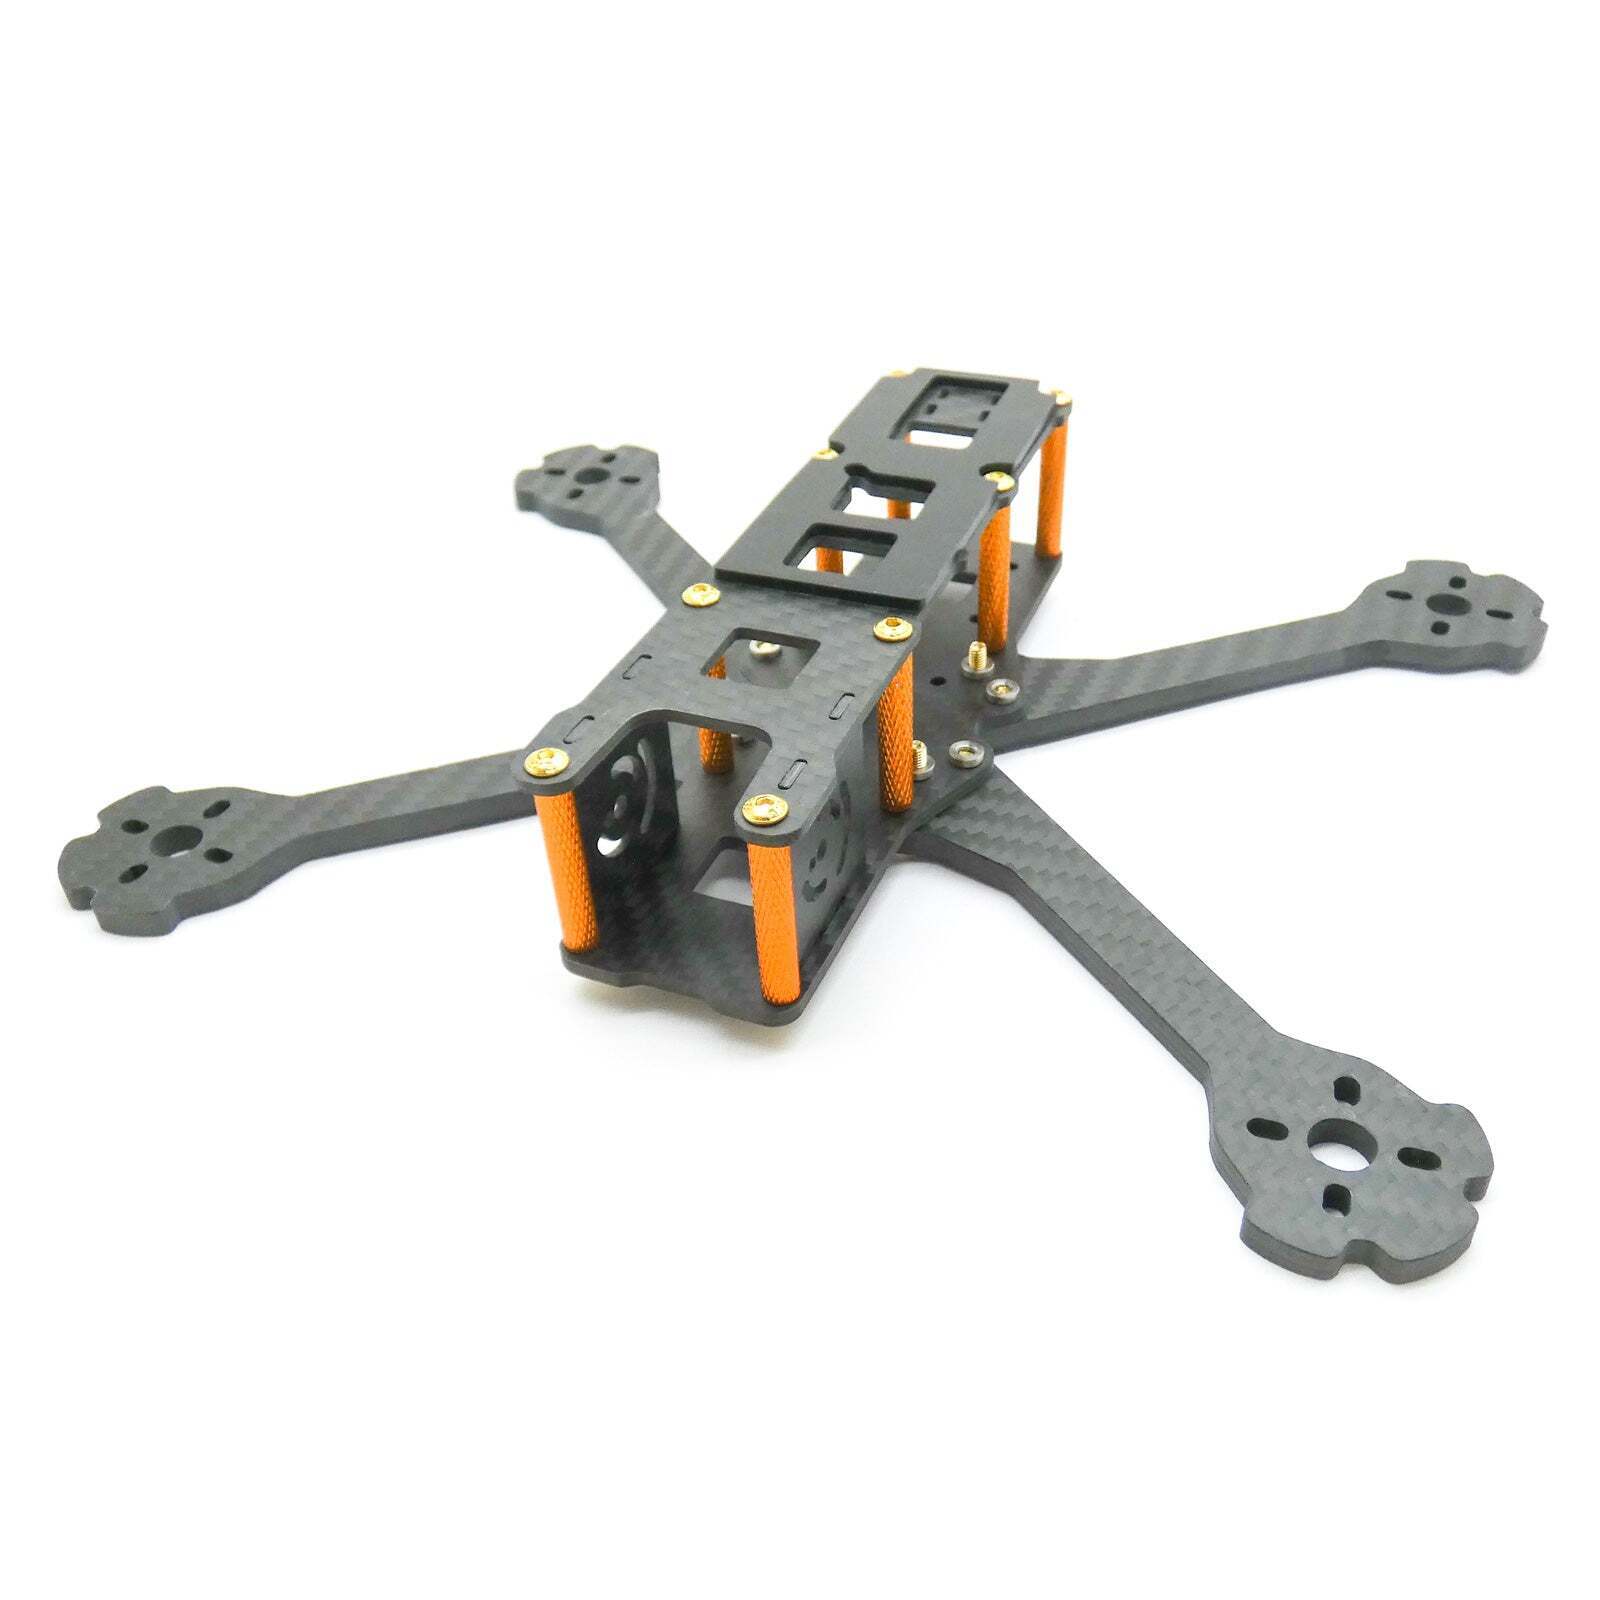 220mm FPV Racing Drone Frame for 5" Props